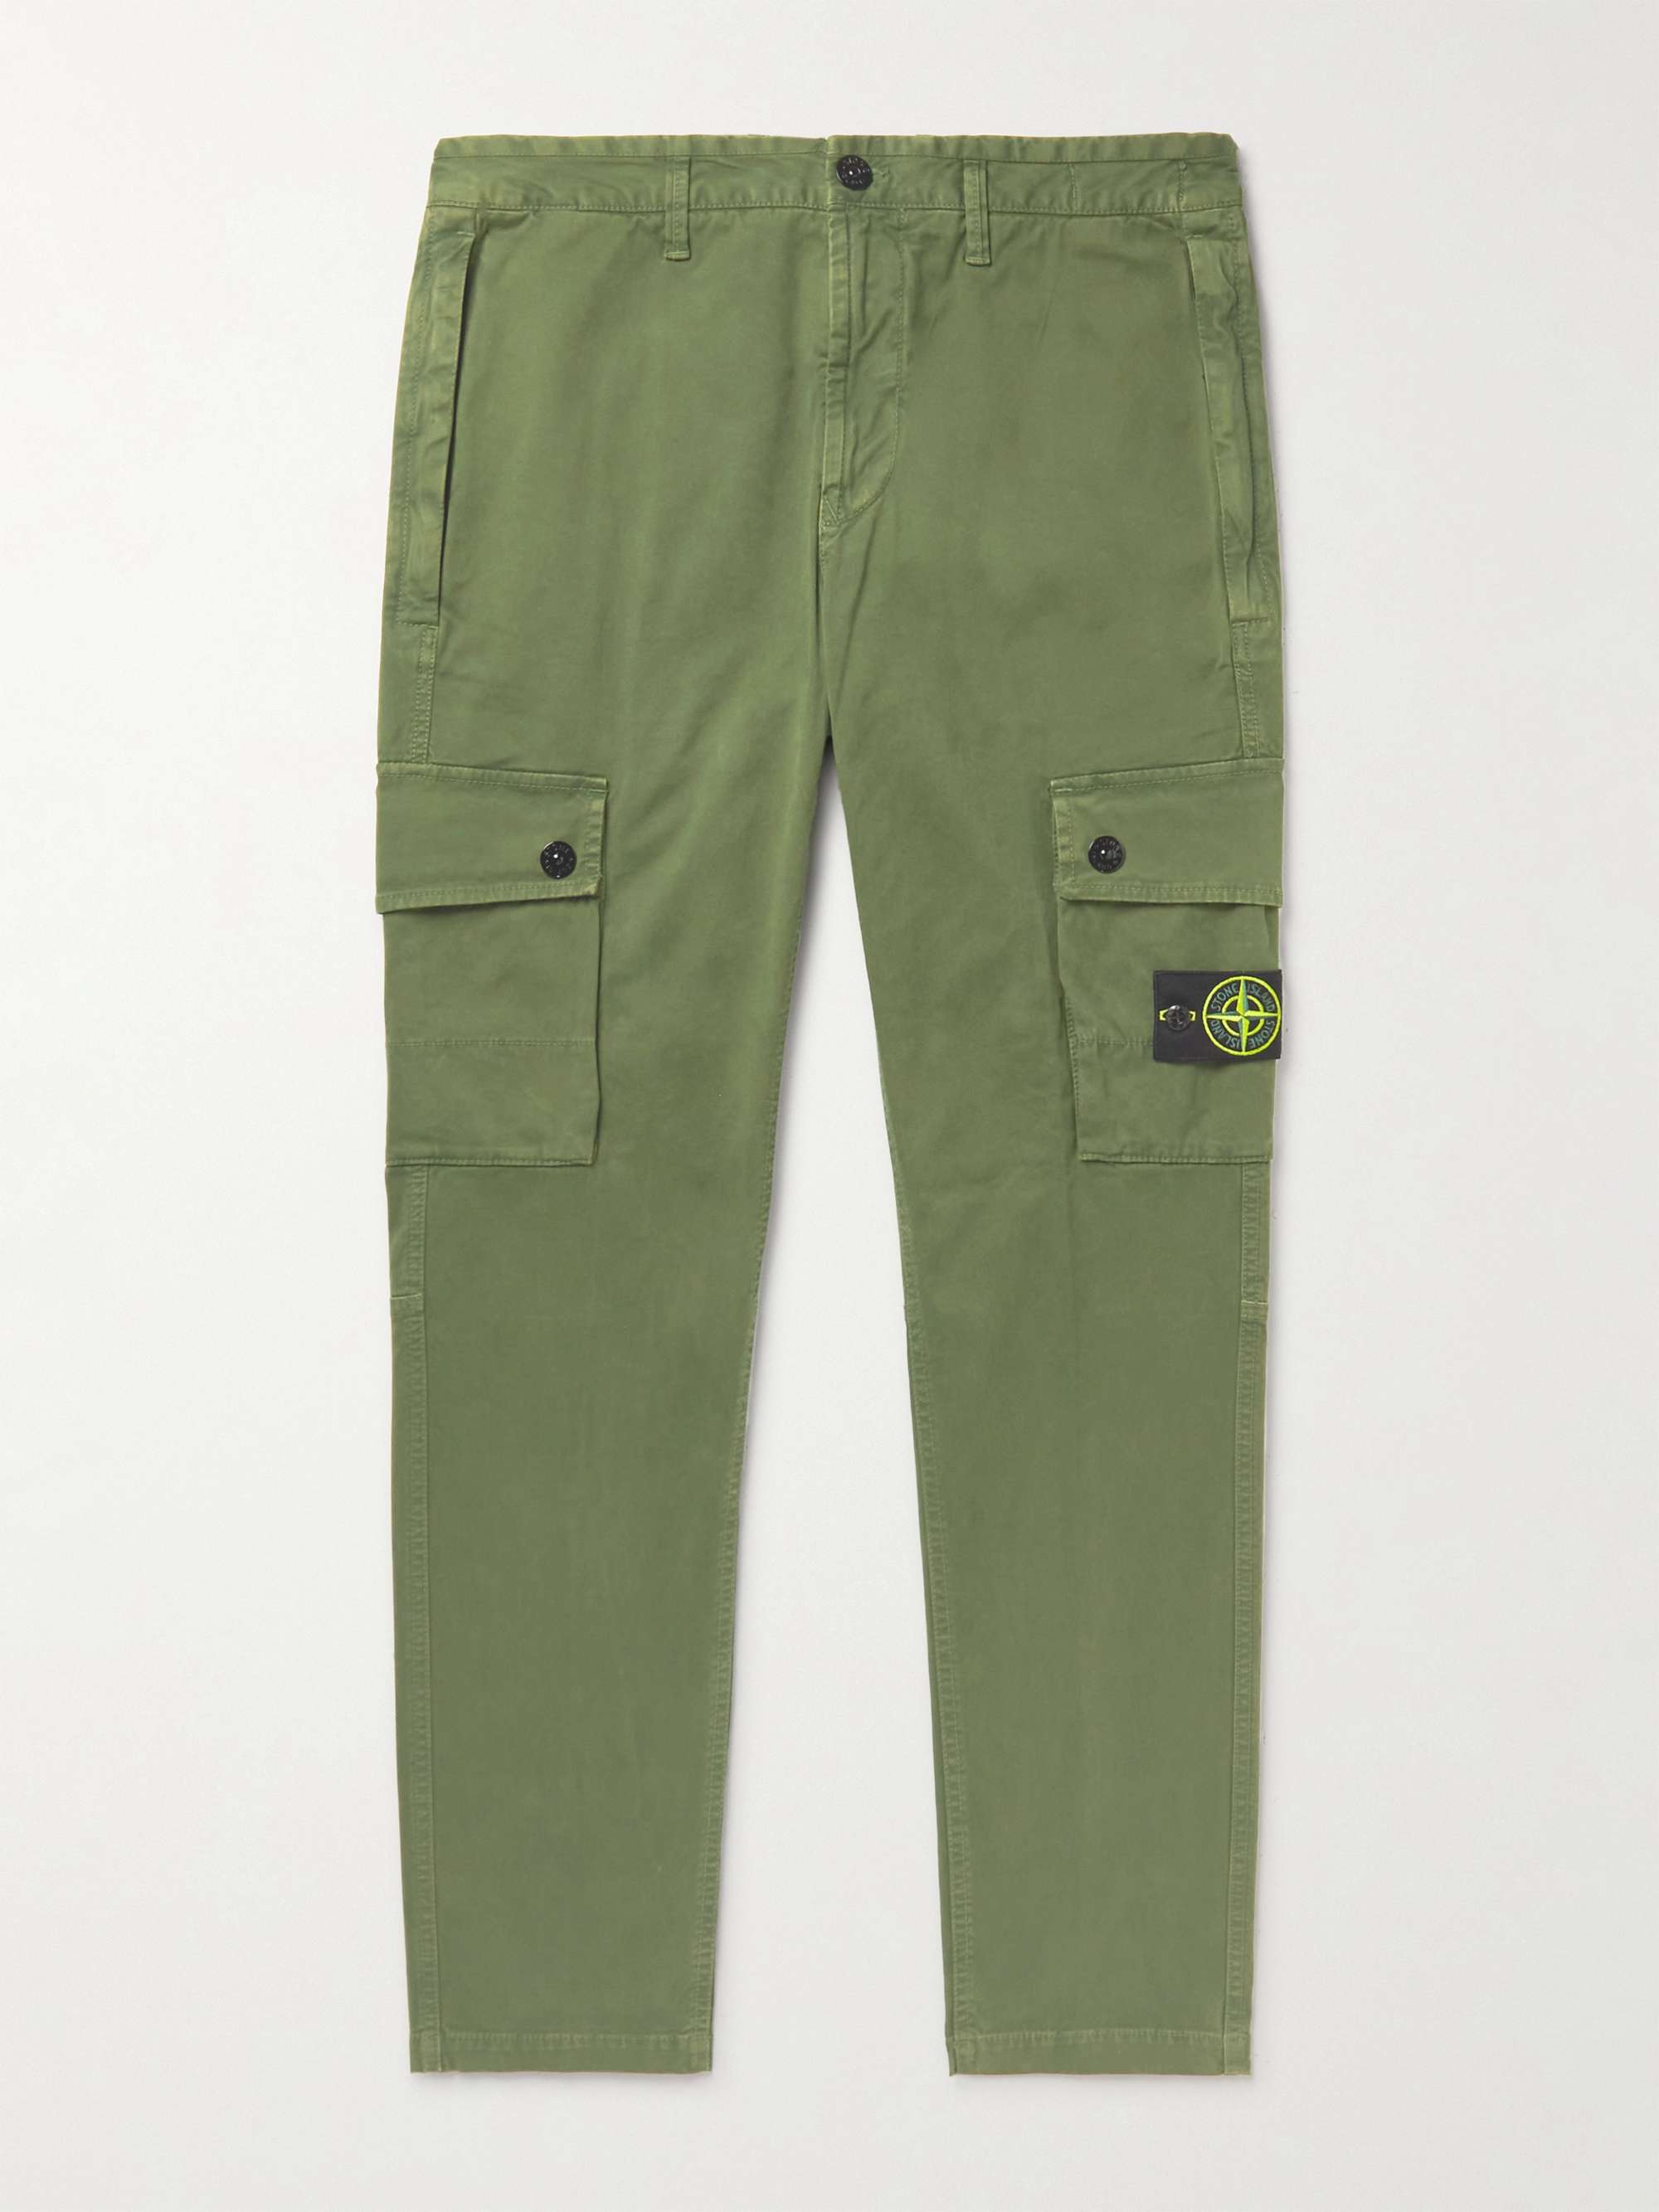 STONE ISLAND Slim-Fit Garment-Dyed Cotton-Blend Twill Cargo Trousers